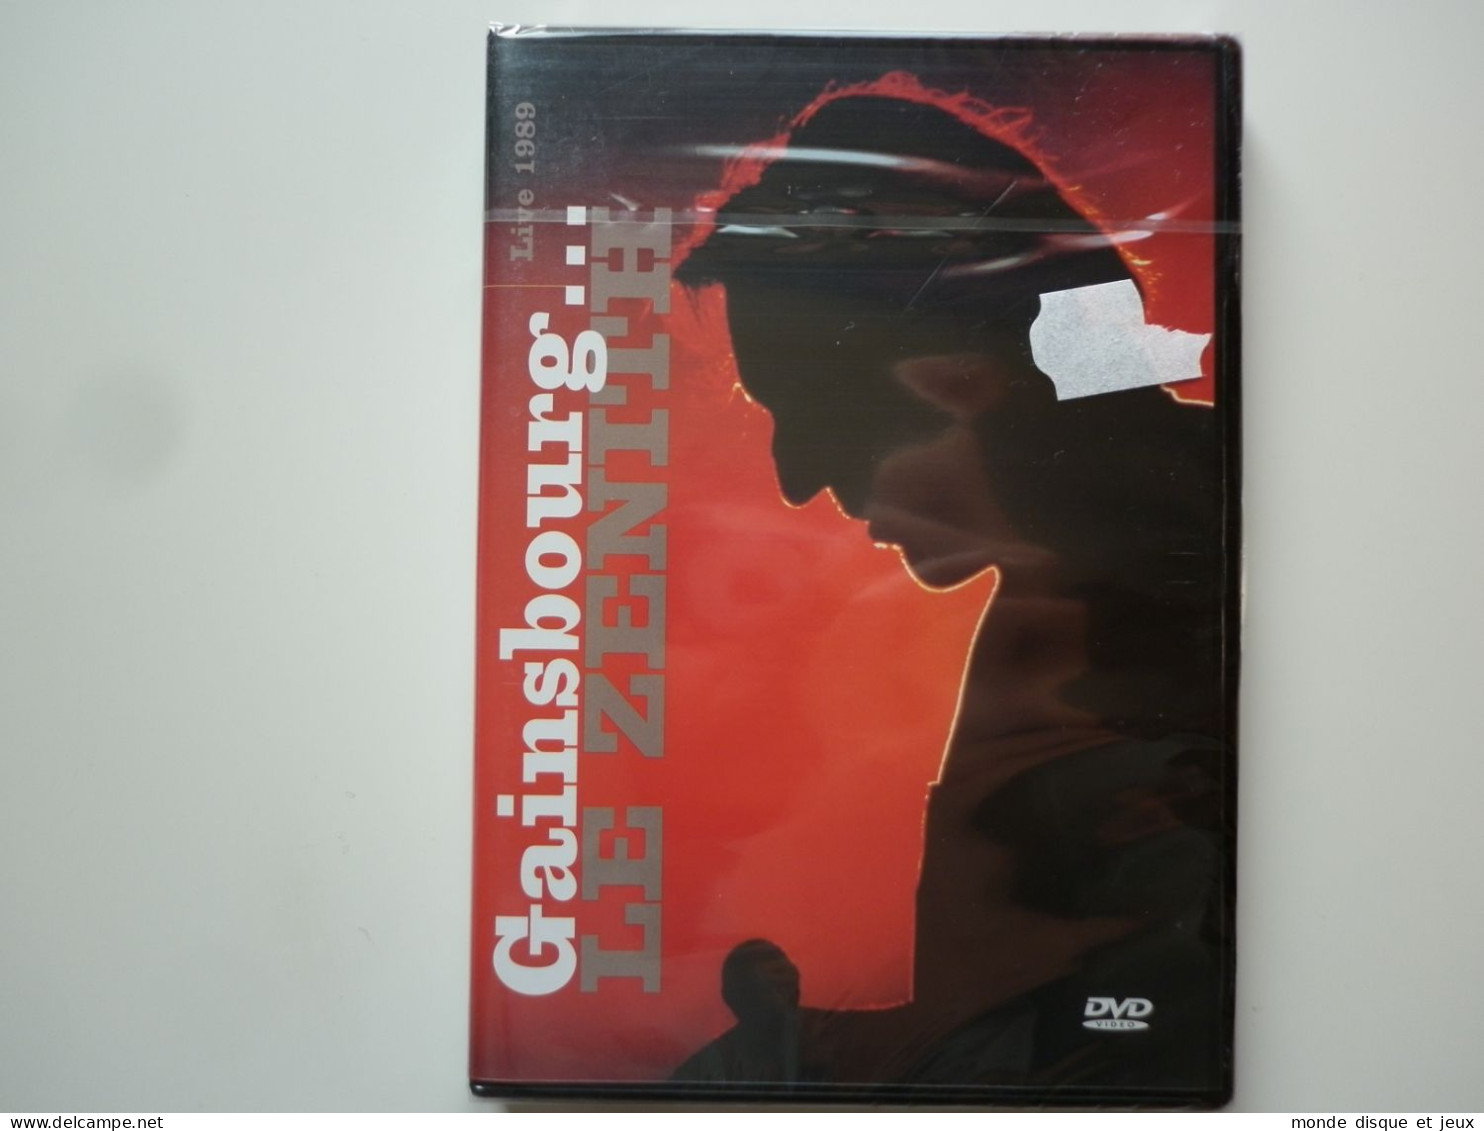 Serge Gainsbourg Dvd Le Zénith (Live 1989) - Music On DVD